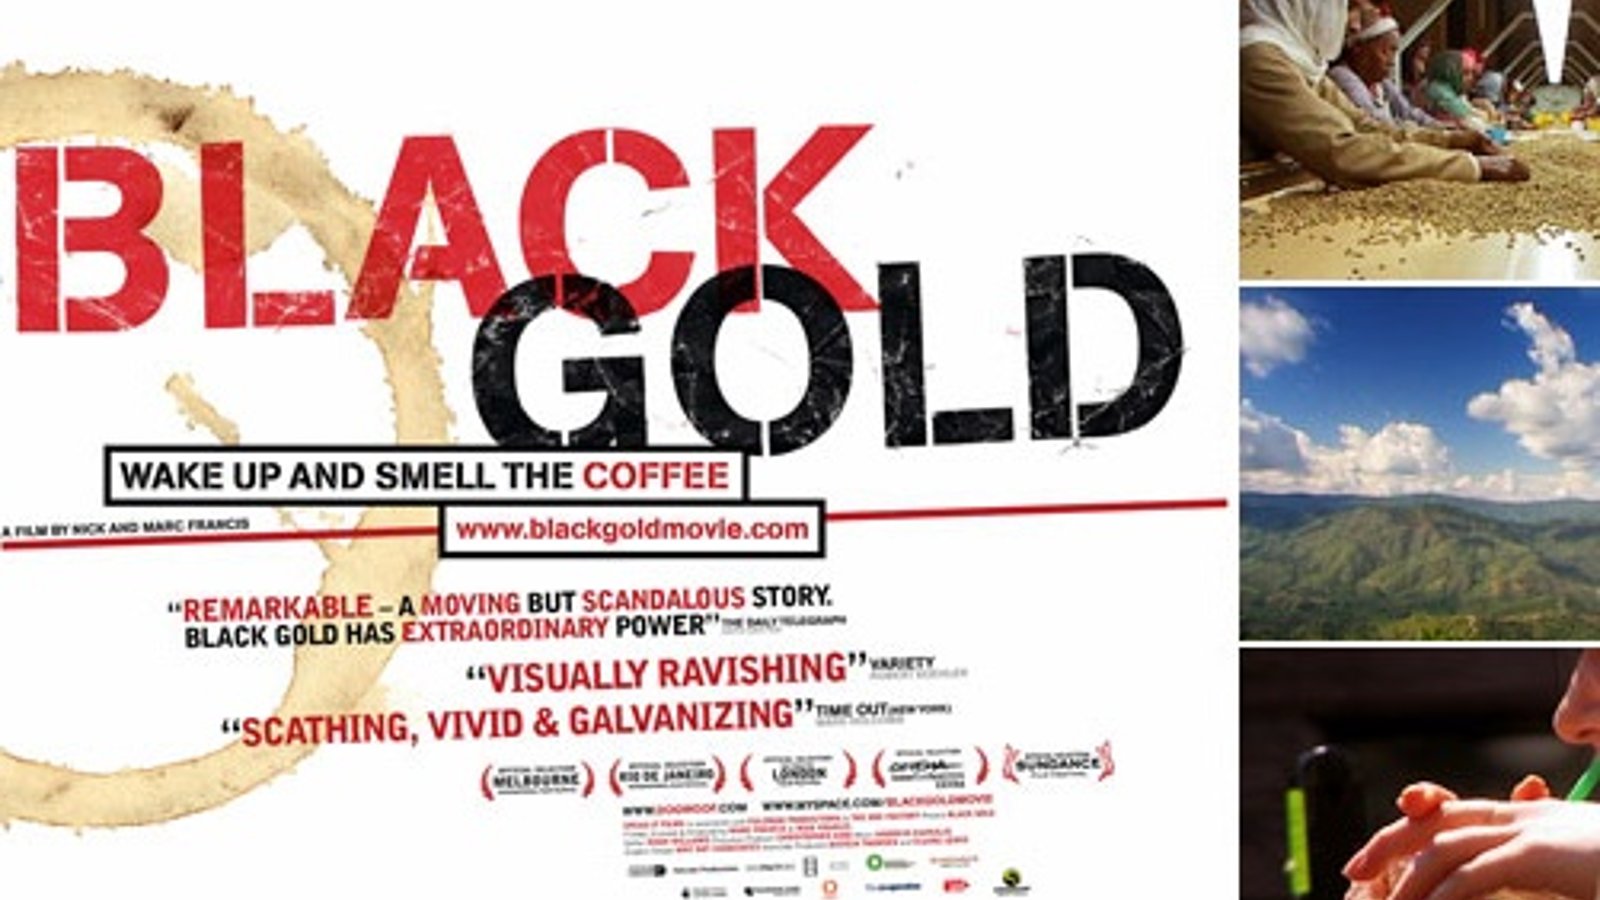 Black Gold - A Look at Coffee Production Around the World